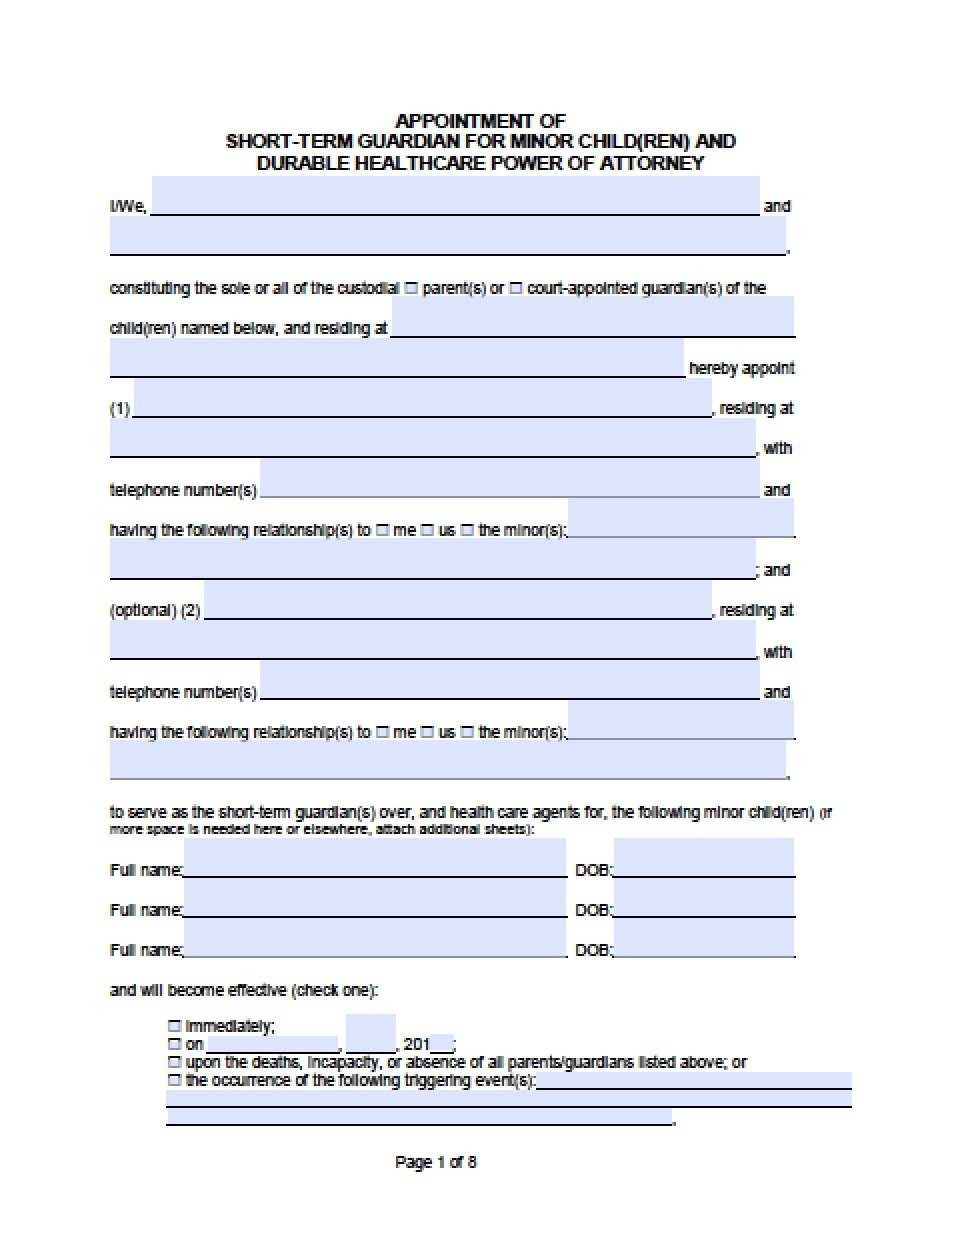 Temporary Guardianship Agreement form California Excellent